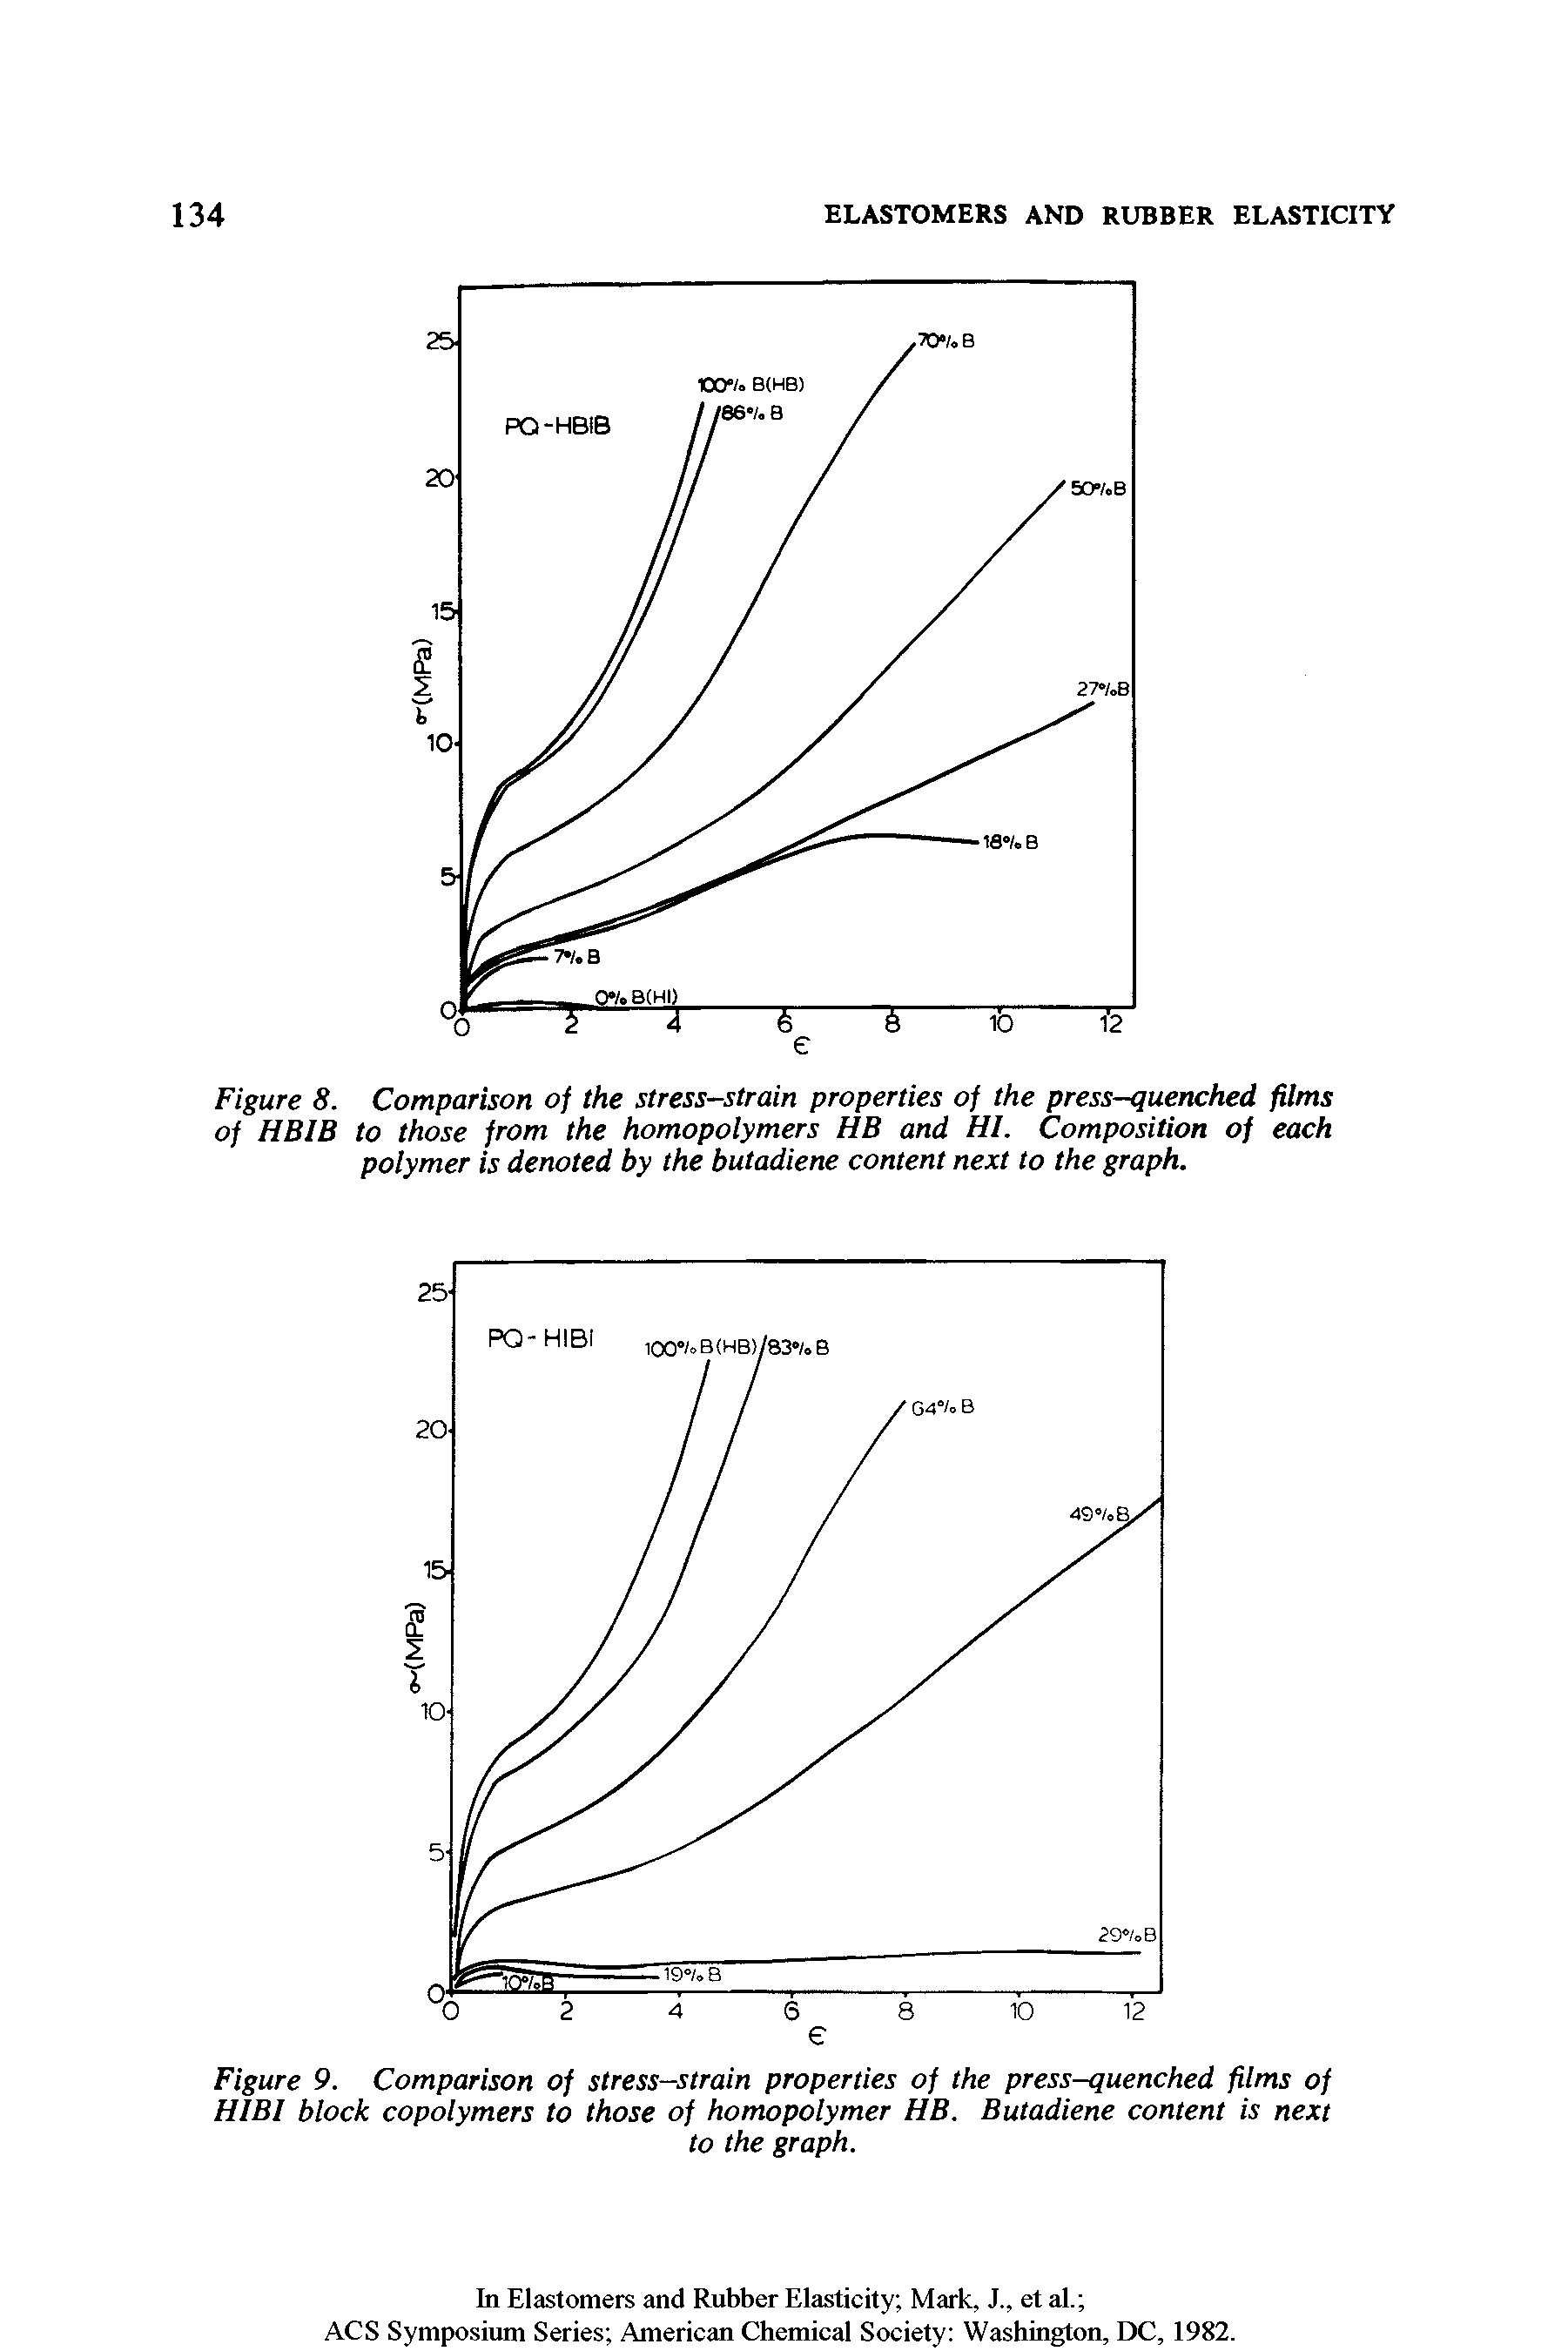 Figure 8. Comparison of the stress-strain properties of the press-quenched films of HBIB to those from the homopolymers HB and HI. Composition of each polymer is denoted by the butadiene content next to the graph.